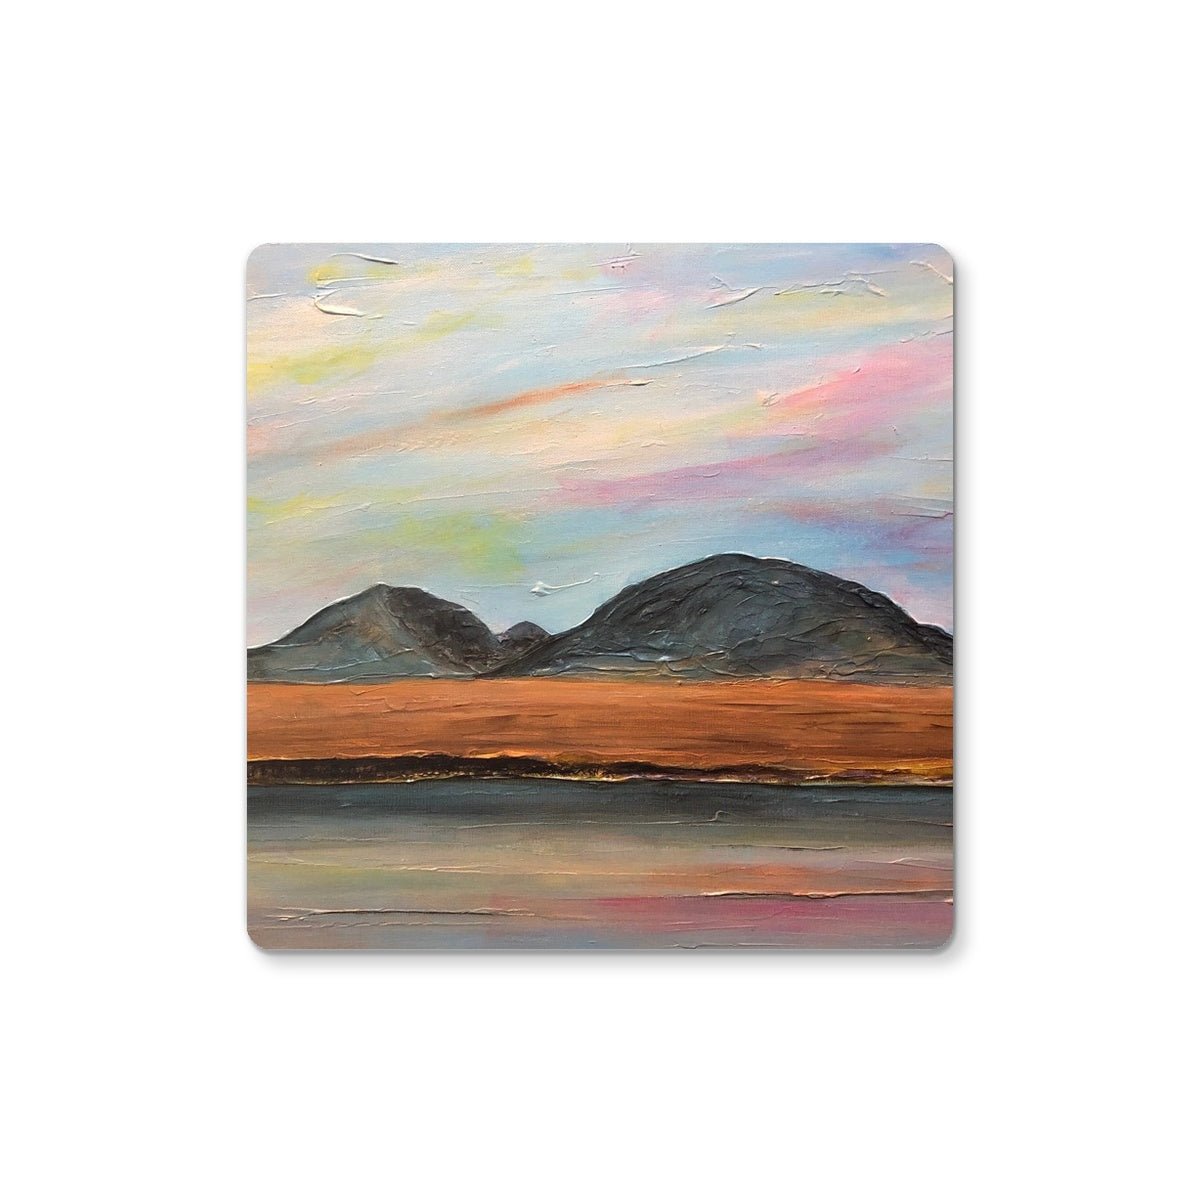 Jura Dawn Art Gifts Coaster-Coasters-Hebridean Islands Art Gallery-2 Coasters-Paintings, Prints, Homeware, Art Gifts From Scotland By Scottish Artist Kevin Hunter